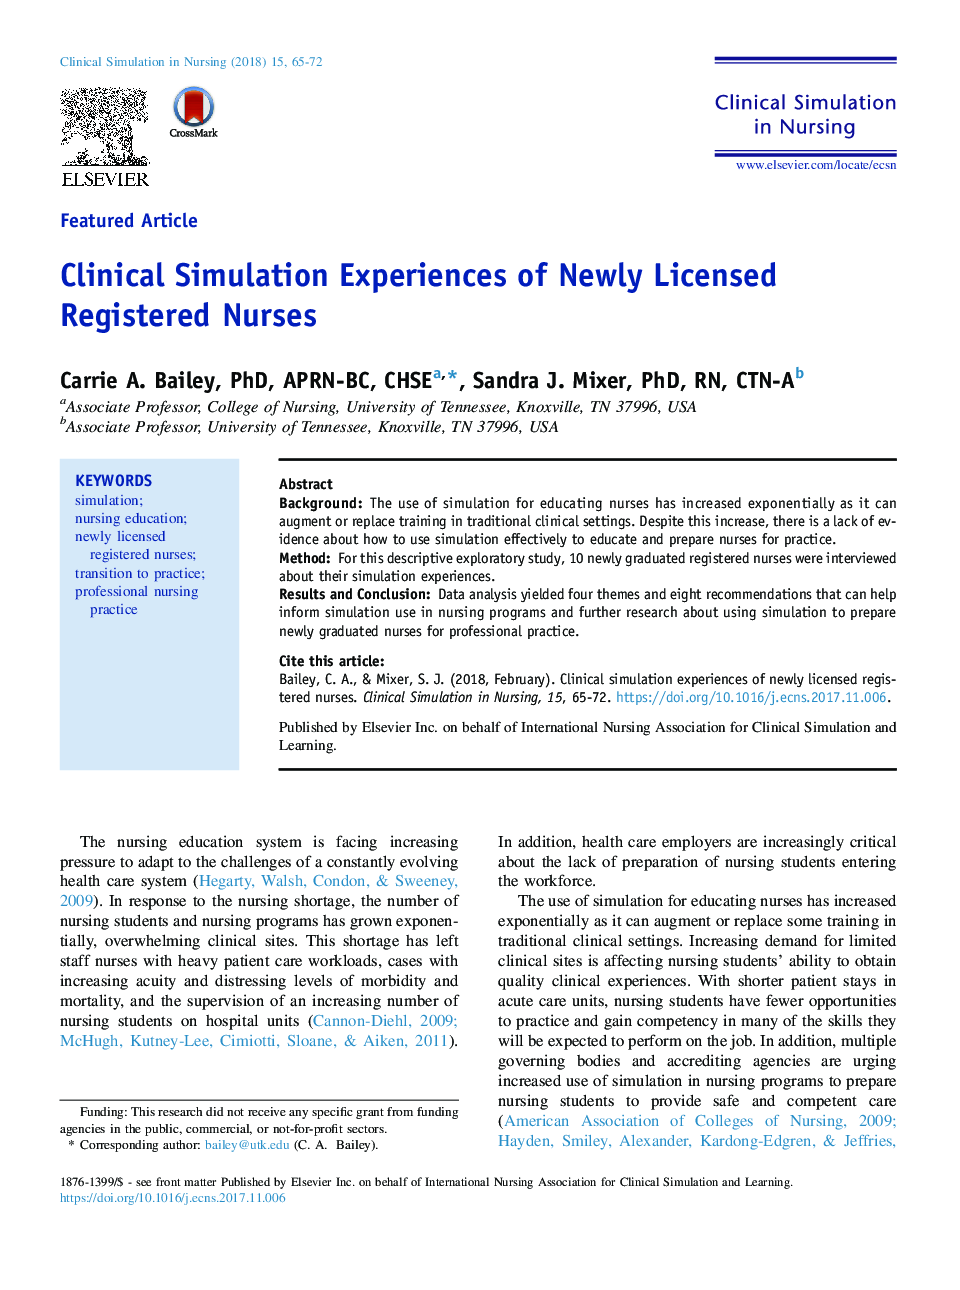 Clinical Simulation Experiences of Newly Licensed Registered Nurses